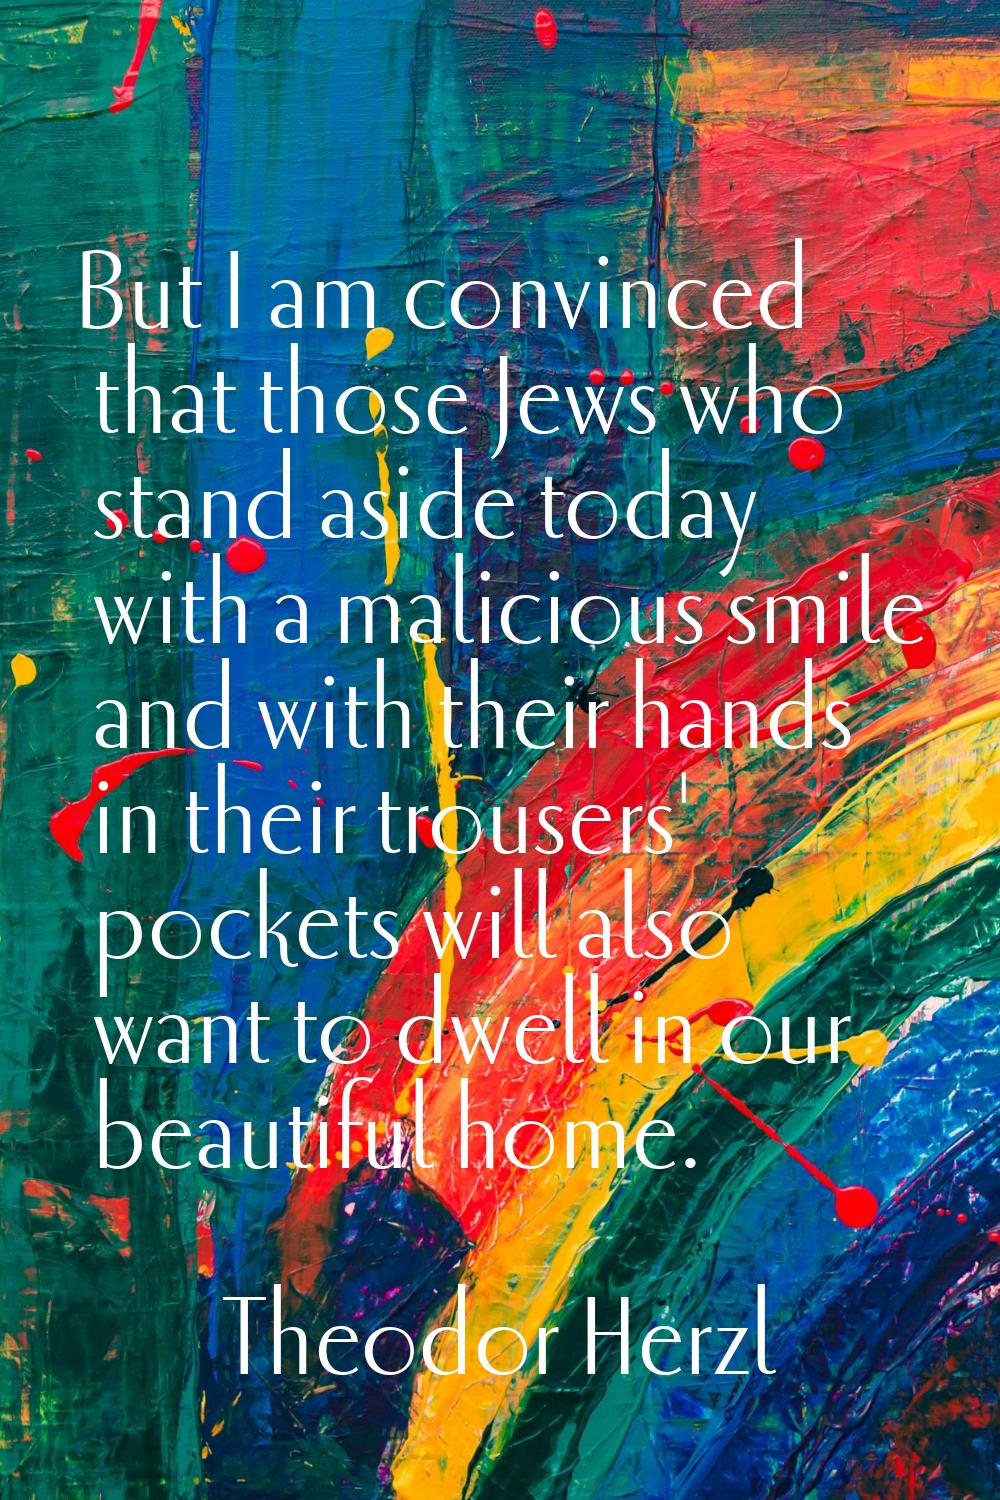 But I am convinced that those Jews who stand aside today with a malicious smile and with their hand